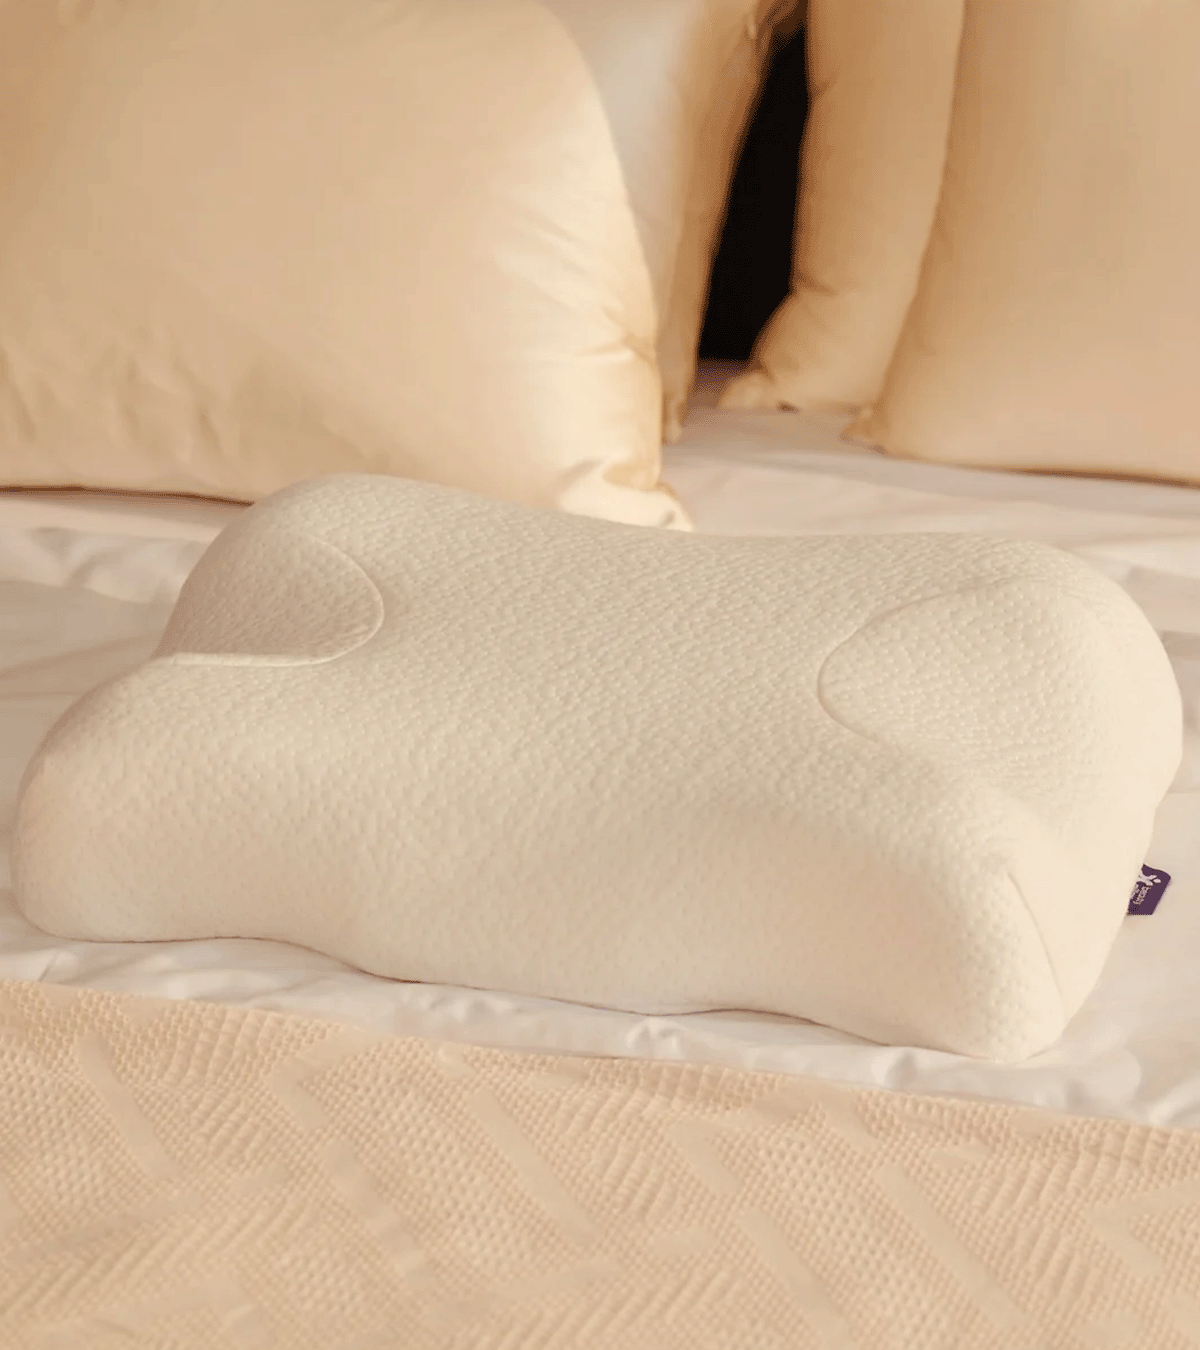  FaceLyft Pillow - Facial Sleep-Wrinkle Prevention Device,  Patented Ear-Recess Design, Designed for Side and Stomach Sleepers, Double  Sided, Cooling Gel, Tencel® - The New Age Fiber casing : Home & Kitchen